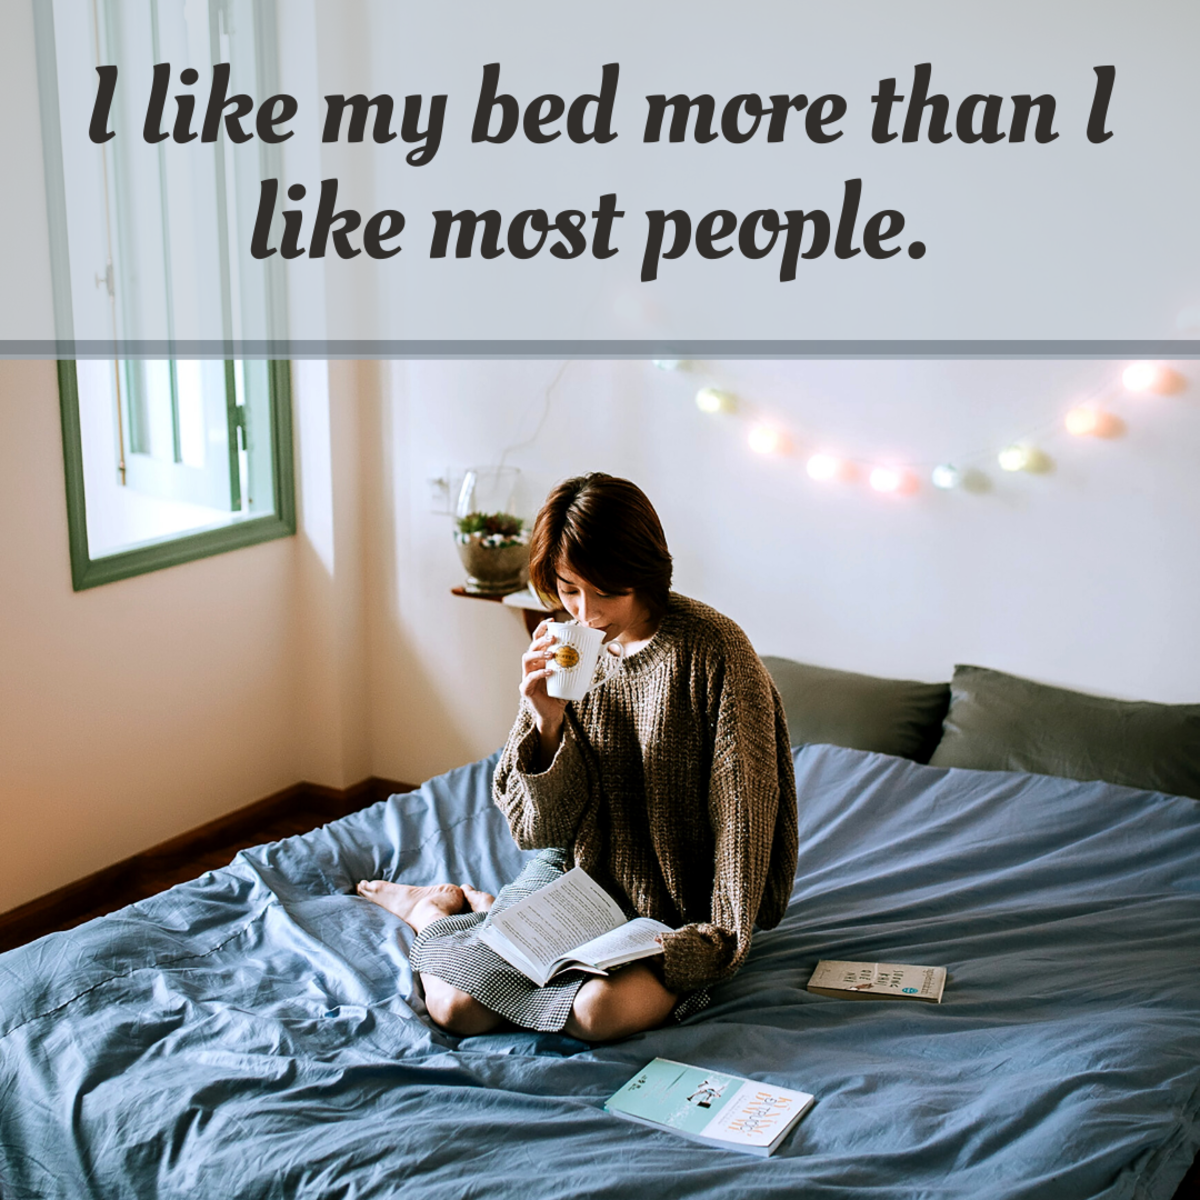 Cute, Funny 'About Me' Quotes and Facebook Status Updates About ...